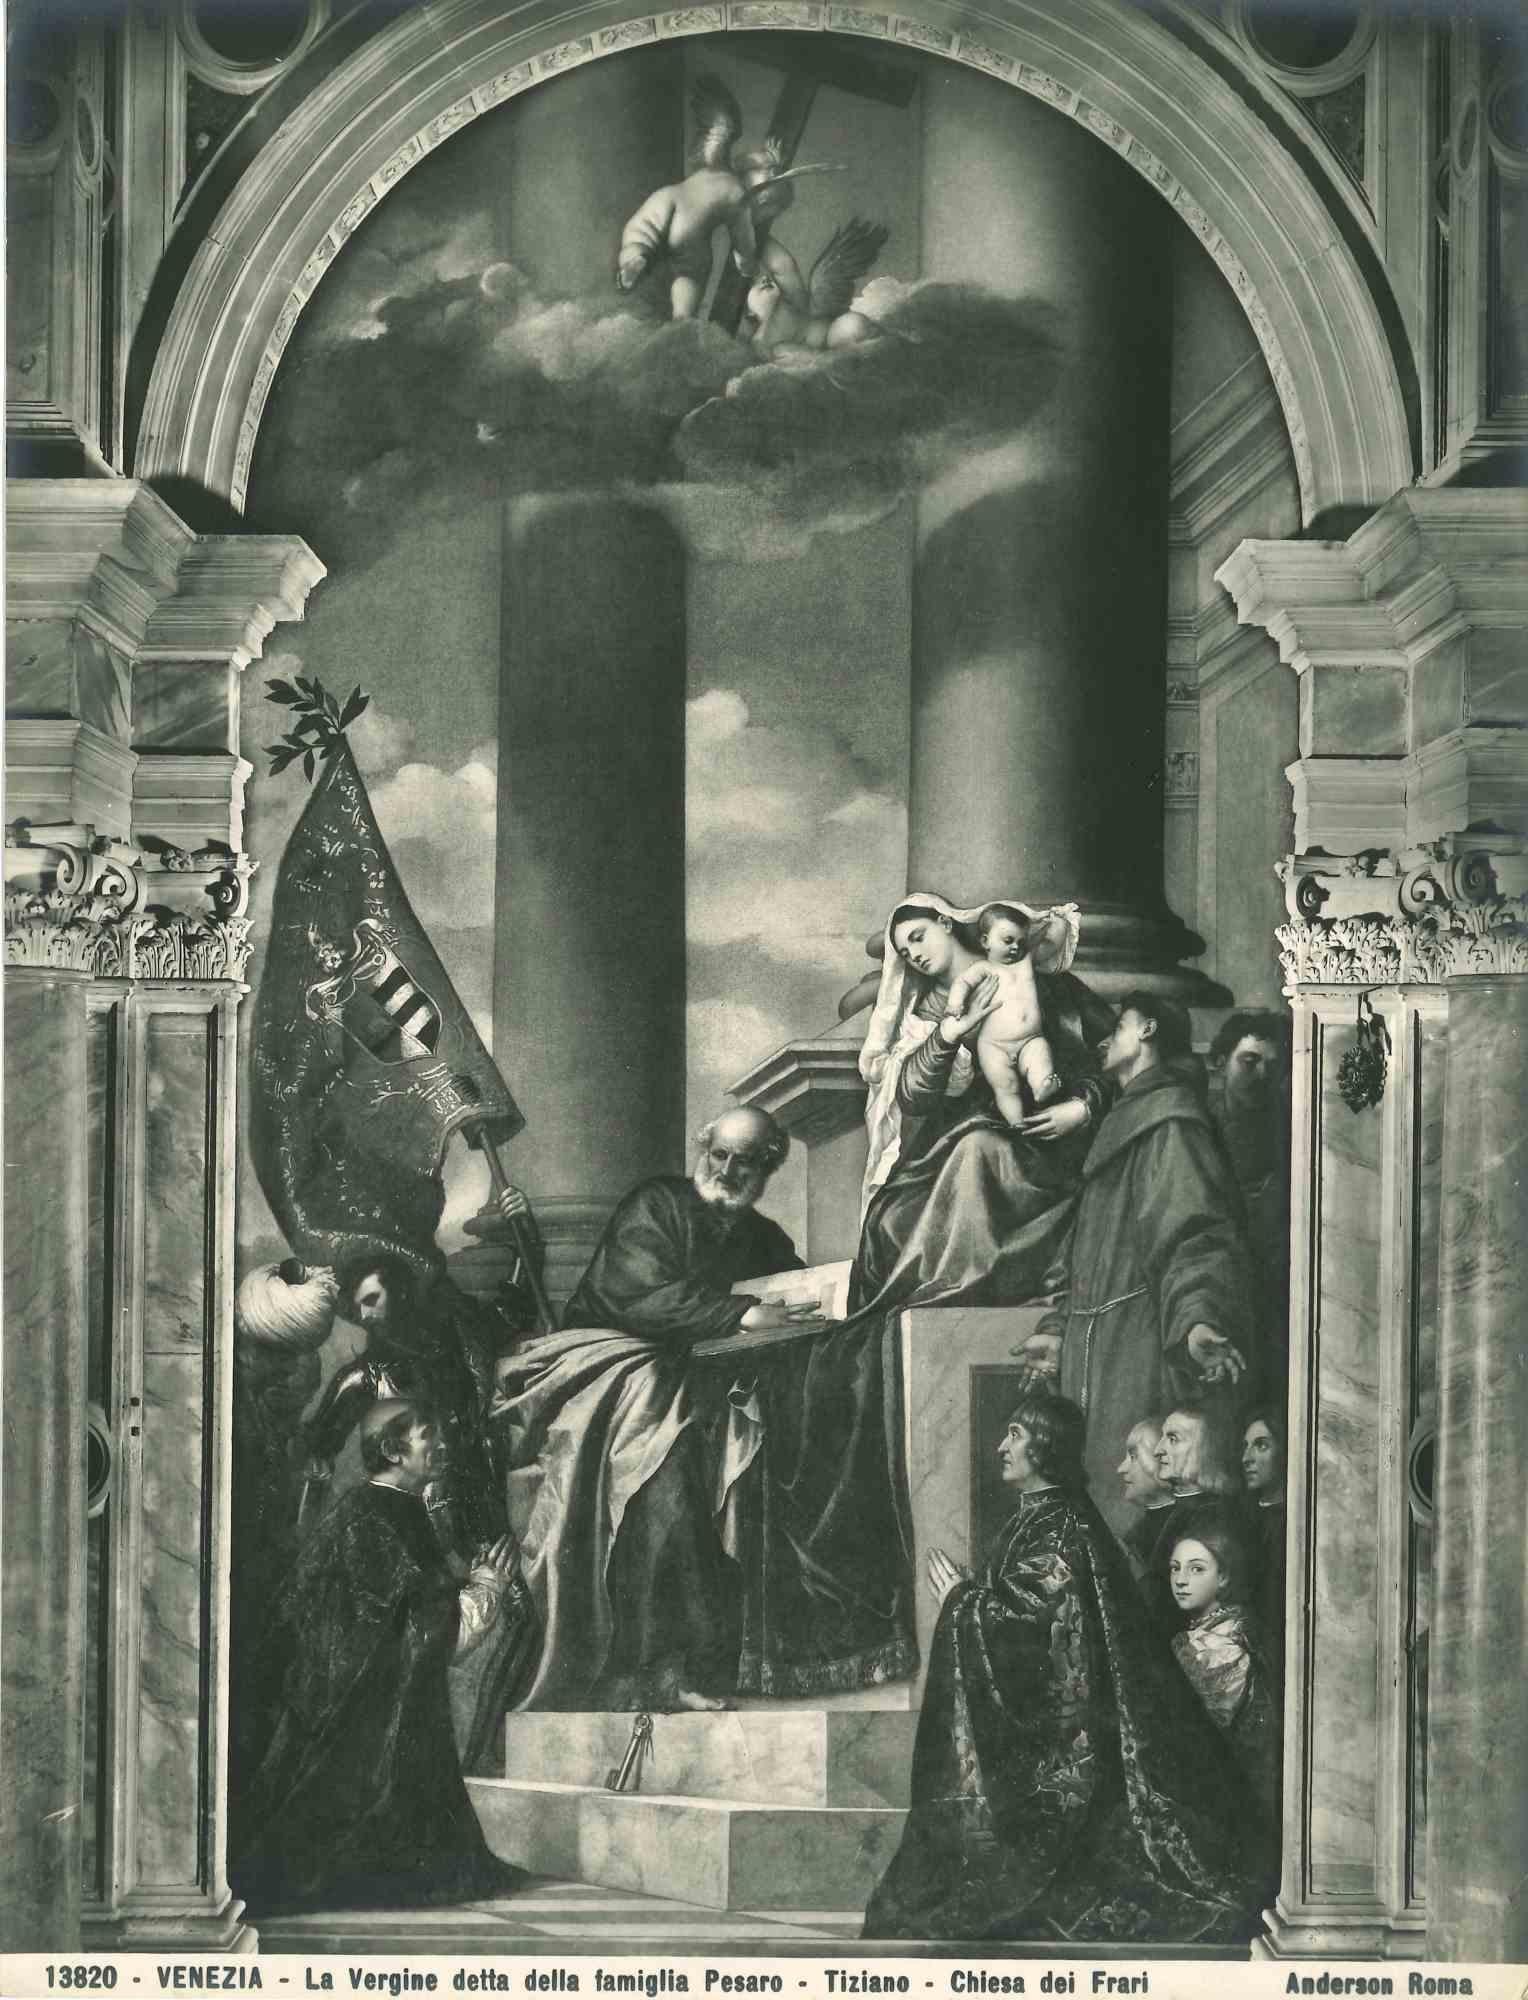 Unknown Portrait Photograph - Architecture and Art Photo- Church of Friar by Tiziano - Venice - 1920s